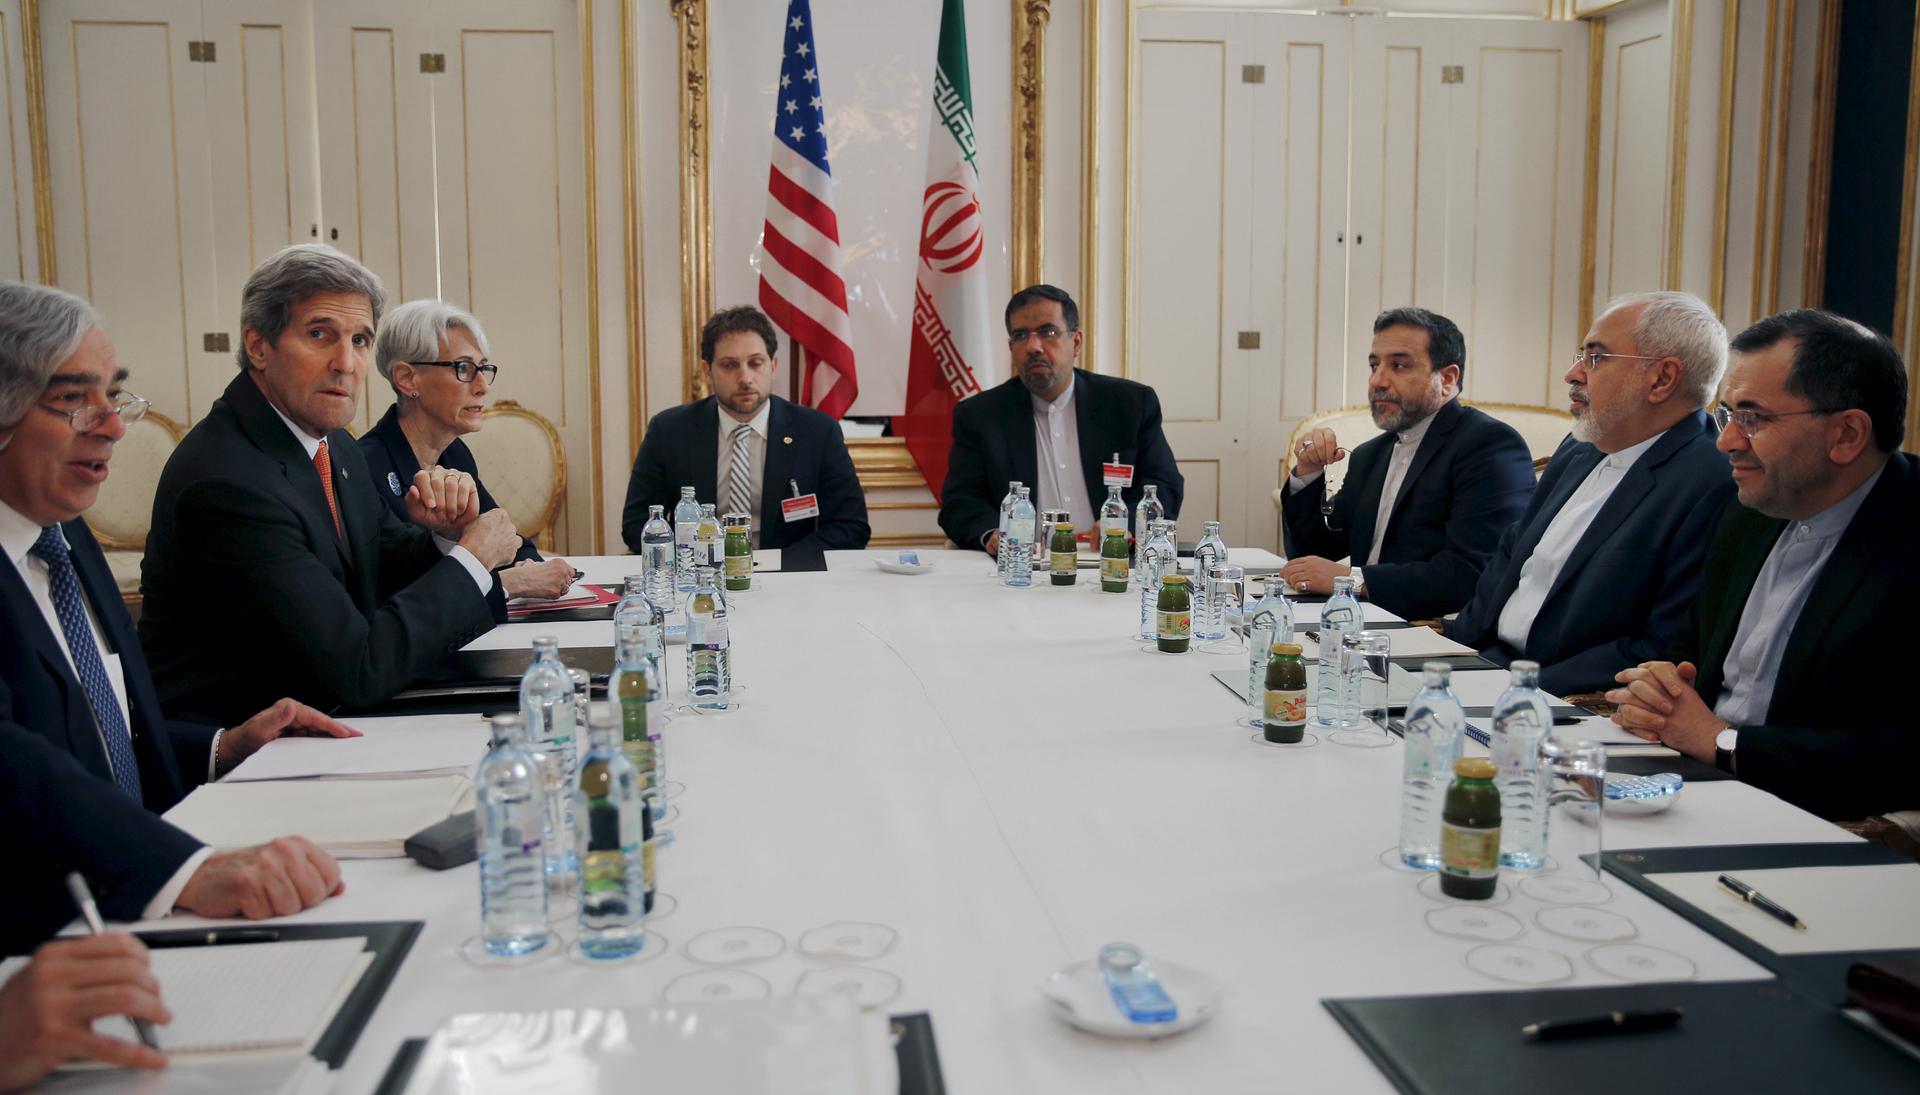 U.S. Secretary of Energy Ernest Moniz, U.S. Secretary of State John Kerry and U.S. Under Secretary for Political Affairs Wendy Sherman (L-3rd L) meet with Iranian Foreign Minister Mohammad Javad Zarif (2nd R) at a hotel in Vienna, Austria June 28, 2015.